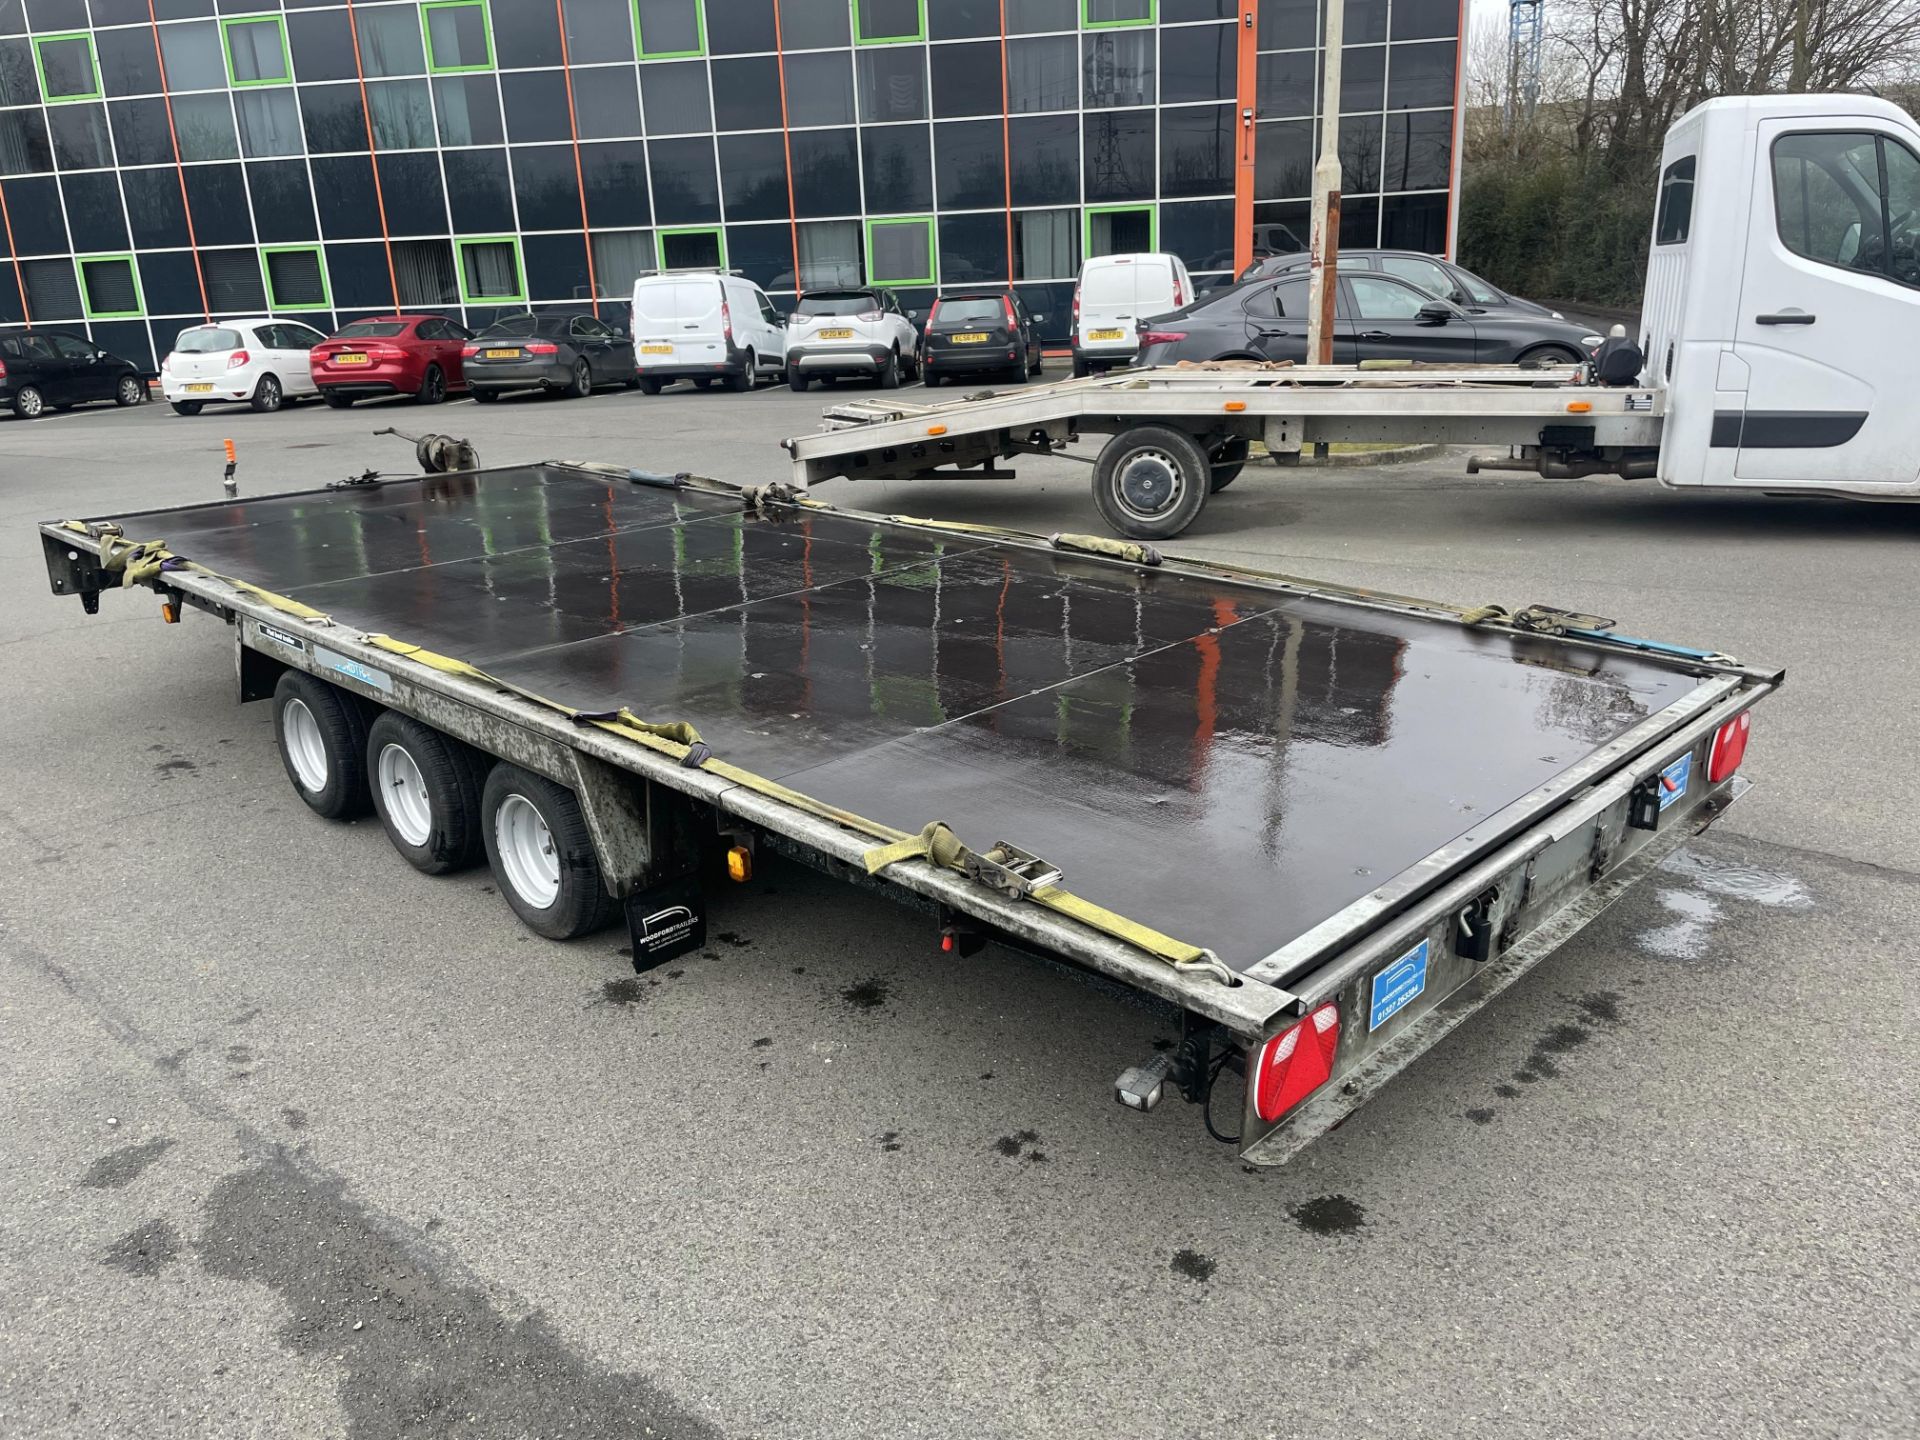 January 2021 Woodford 18 Ft Tri-Axle Hydraulic Tilt Flatbed Trailer c/w Ramps and Manual winch - Image 3 of 10